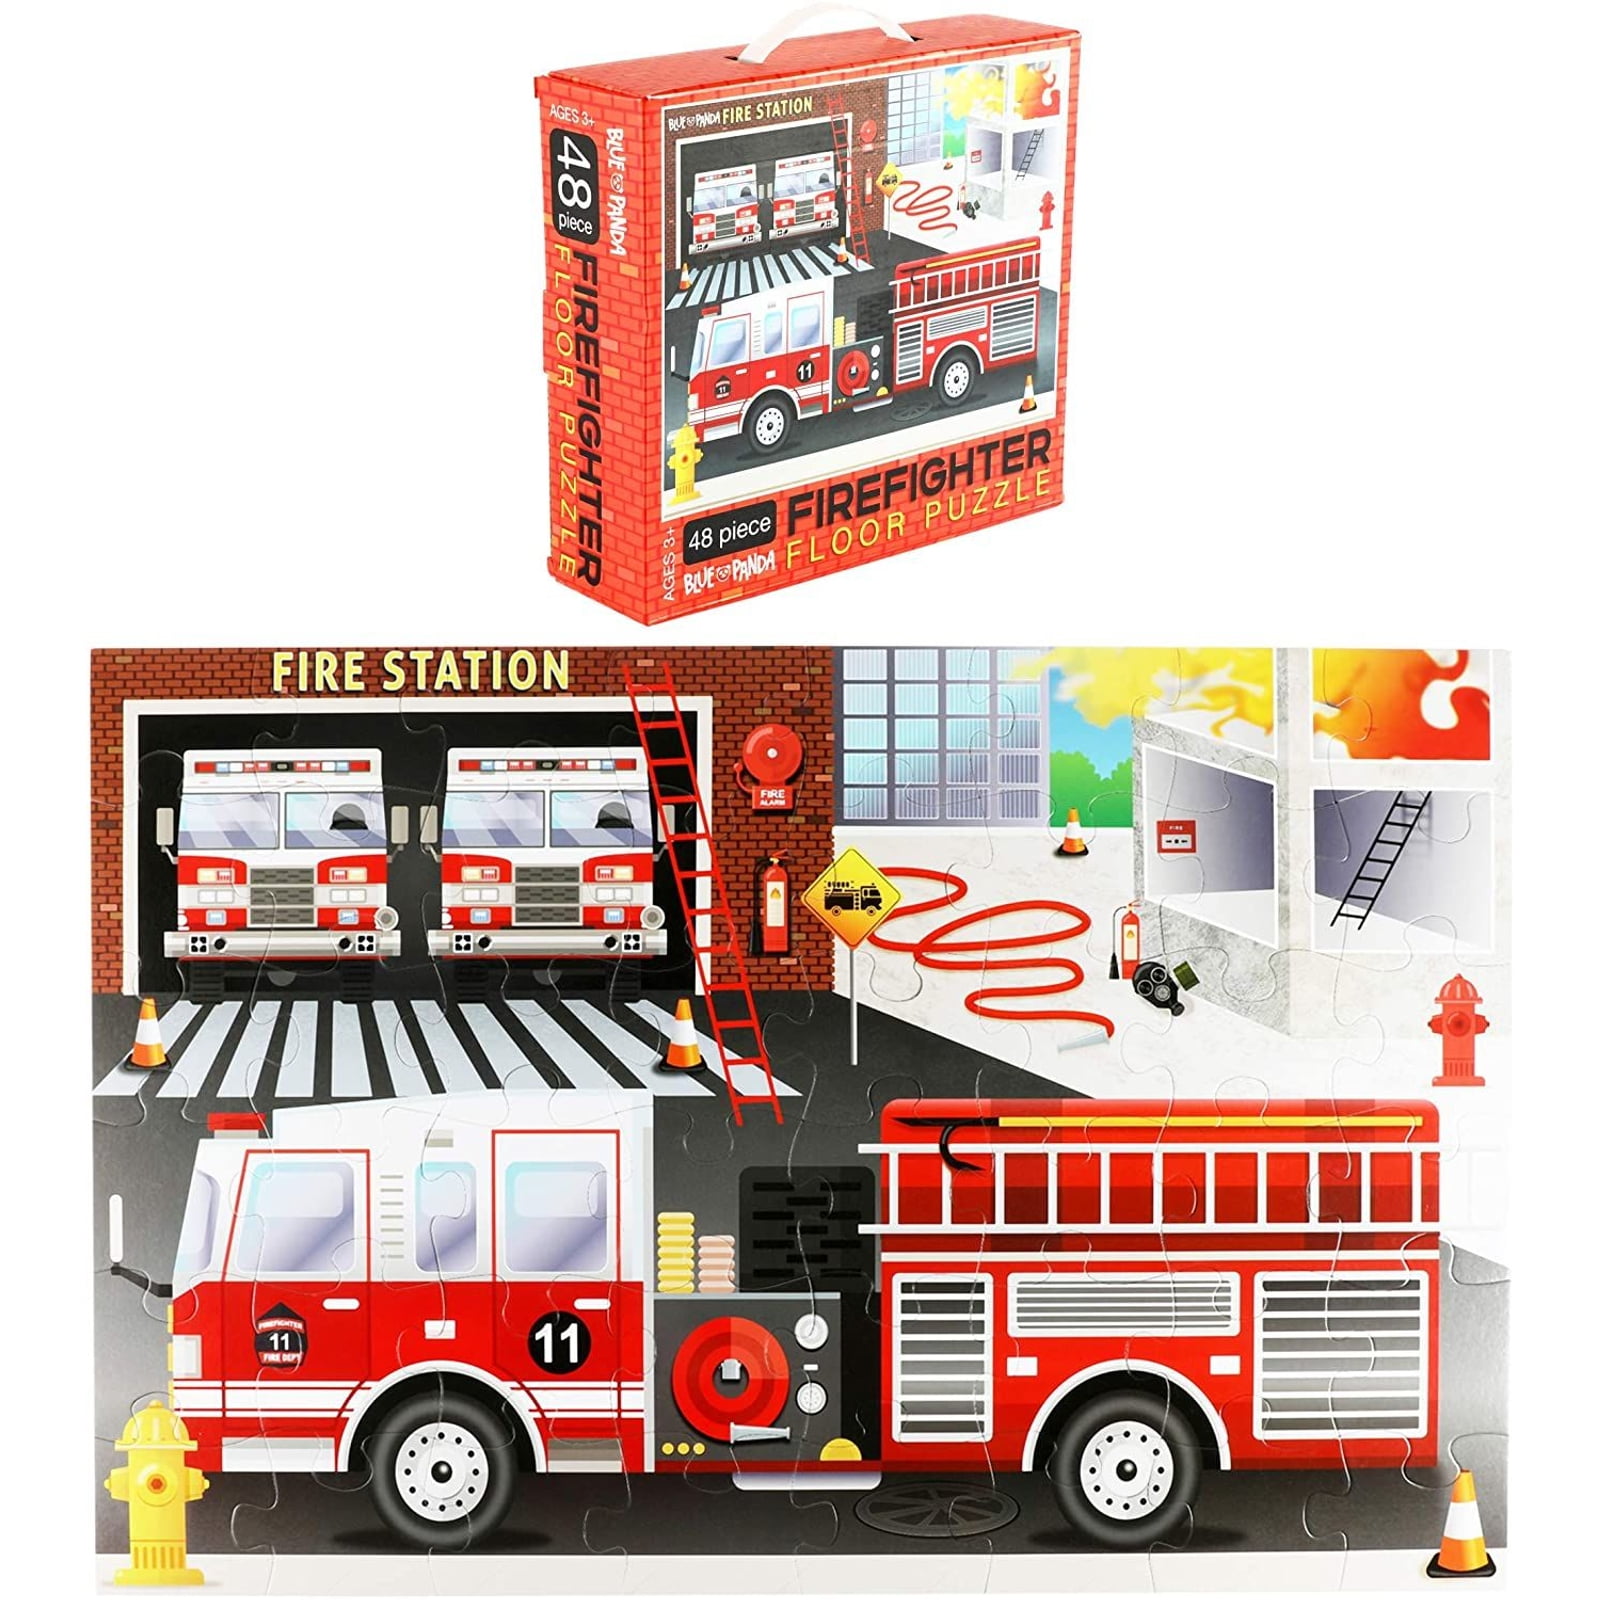 Melissa & Doug Deluxe Fire Truck Chunky Puzzle